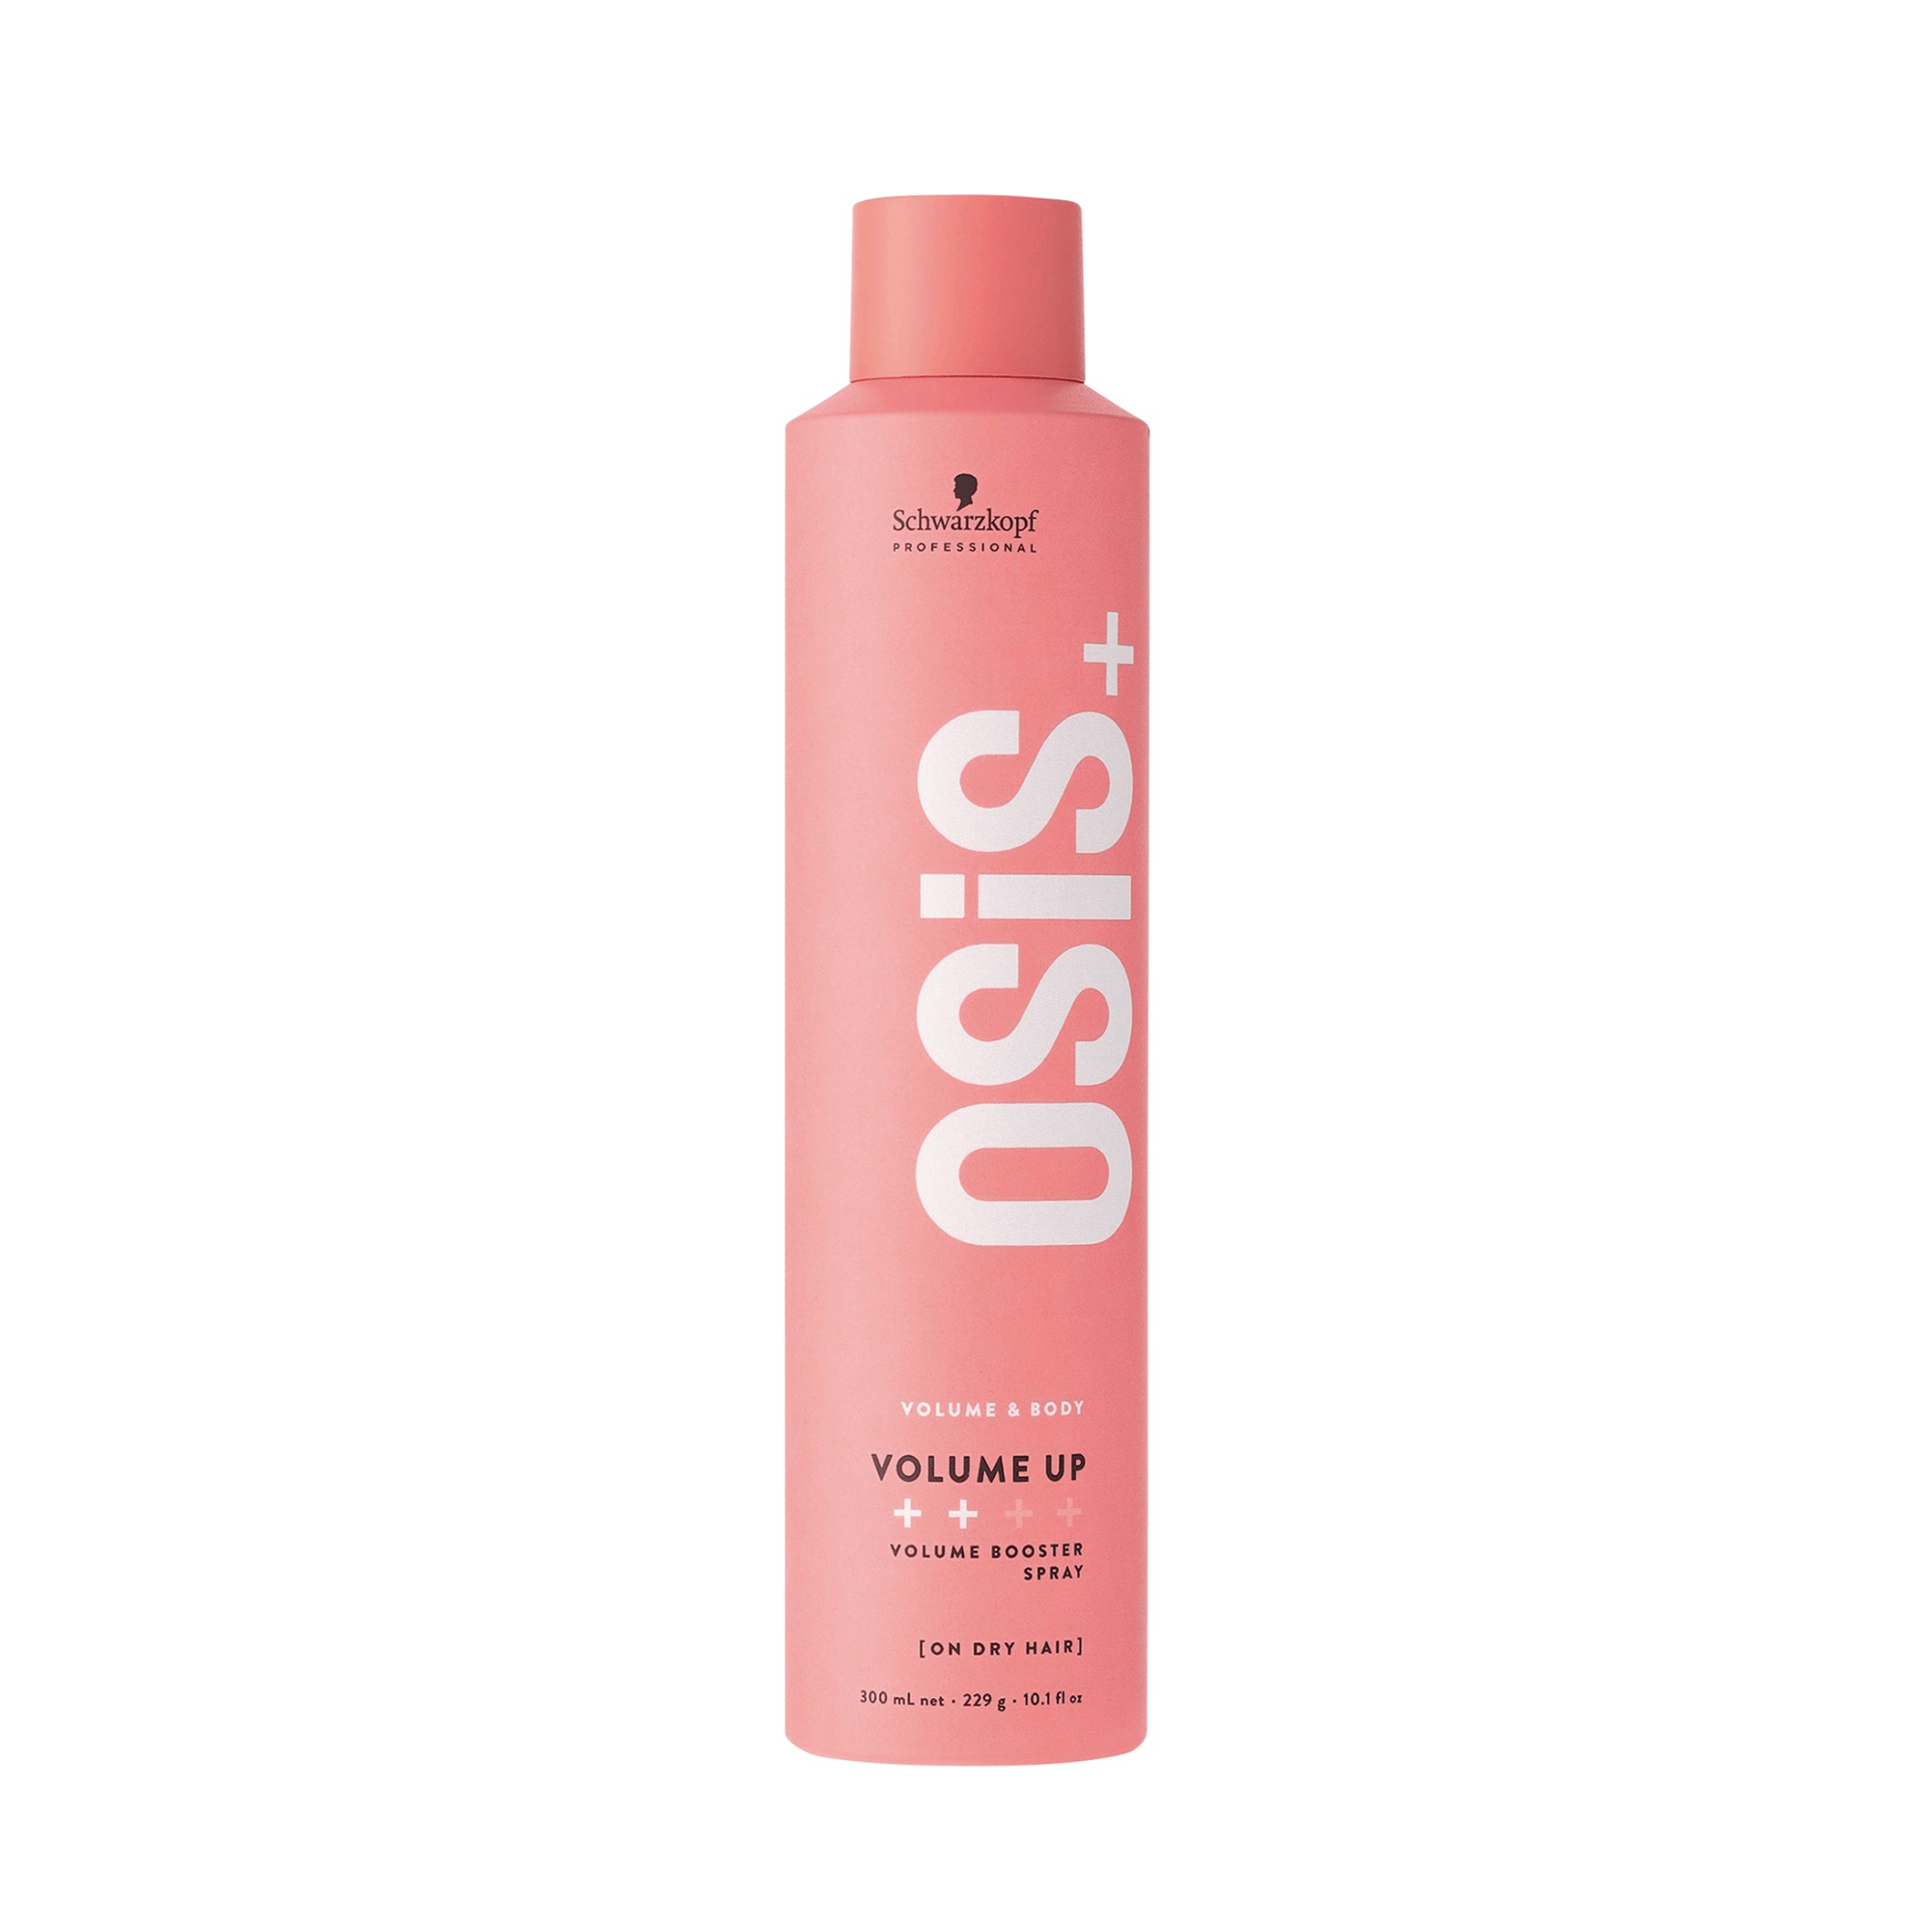 Osis Nuevo Hair Styling Products OSiS Volume Up 300ml Roberta Beauty Club Tienda Online Productos de Peluqueria